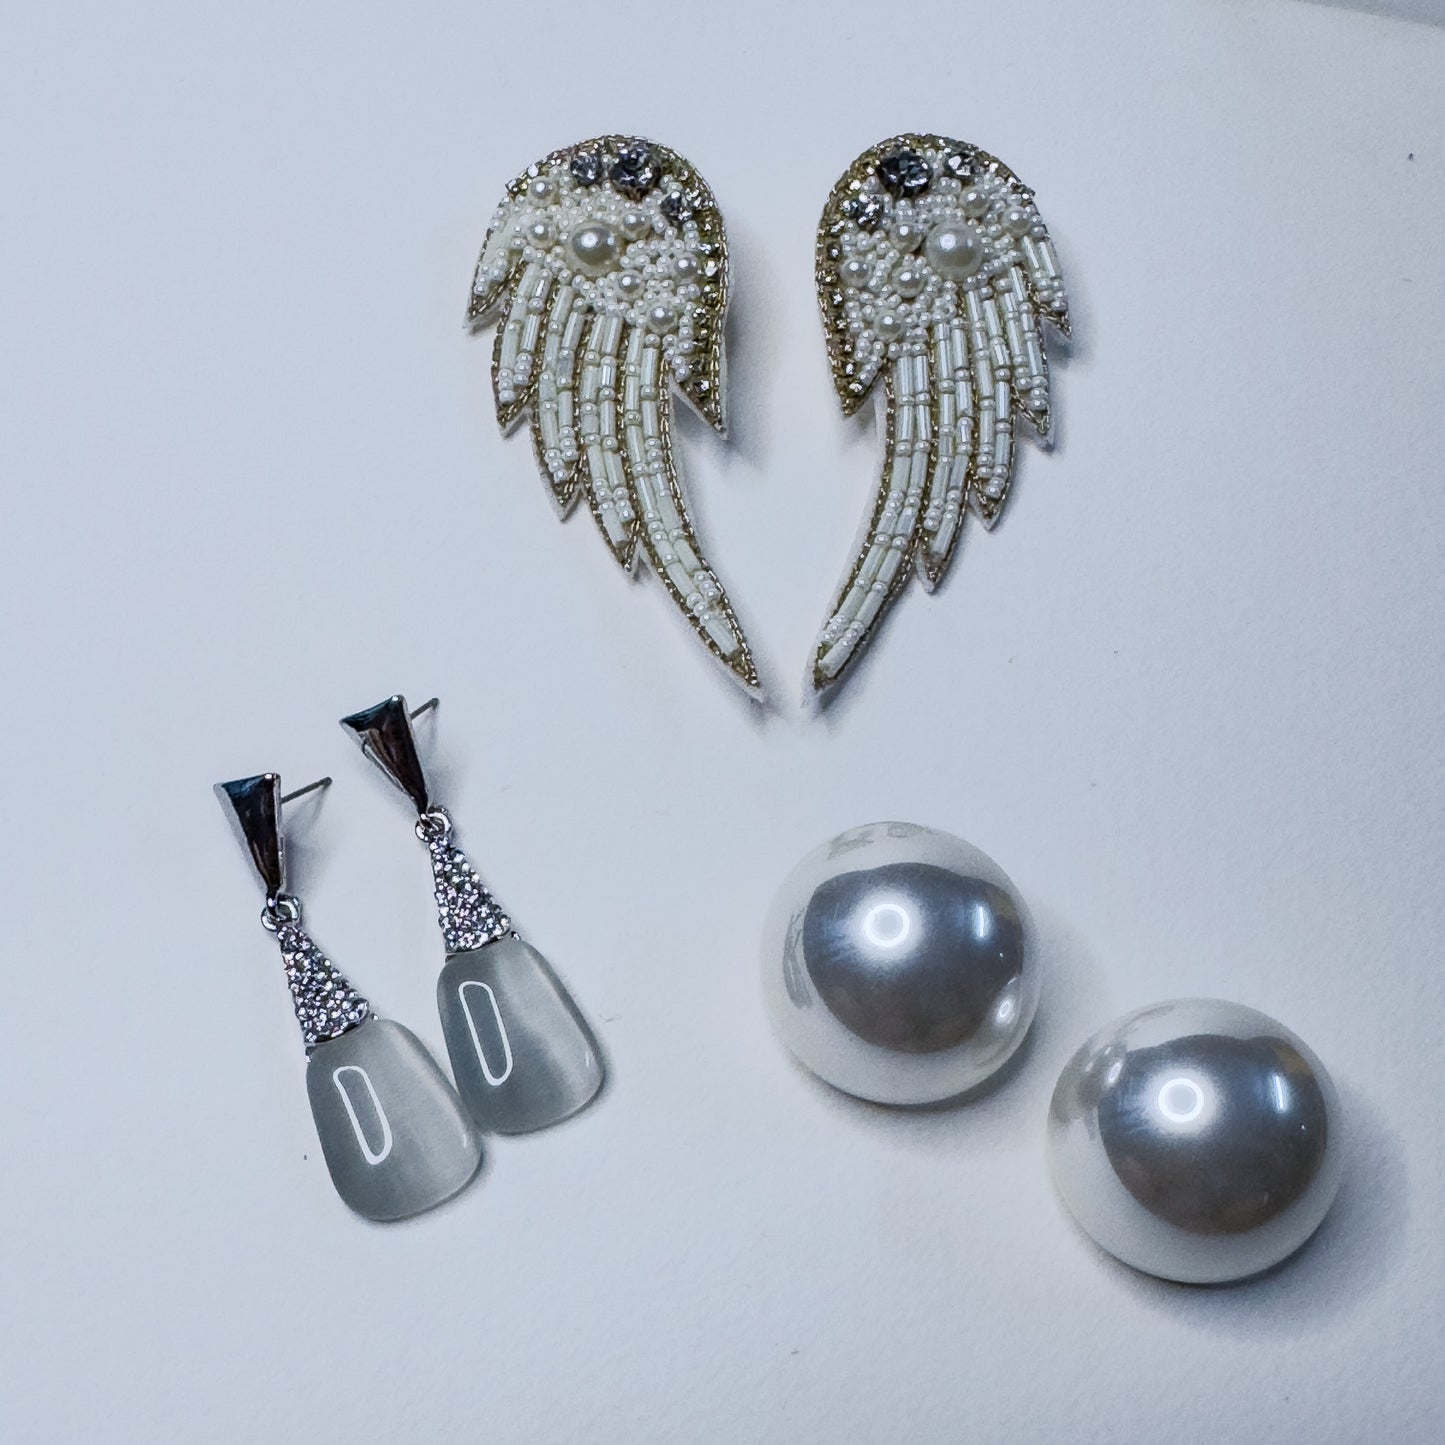 thereal White Earrings Trio - Handmade Angel Wing, Big Pearl Stud, White & Silver Dangle (Set of 3)